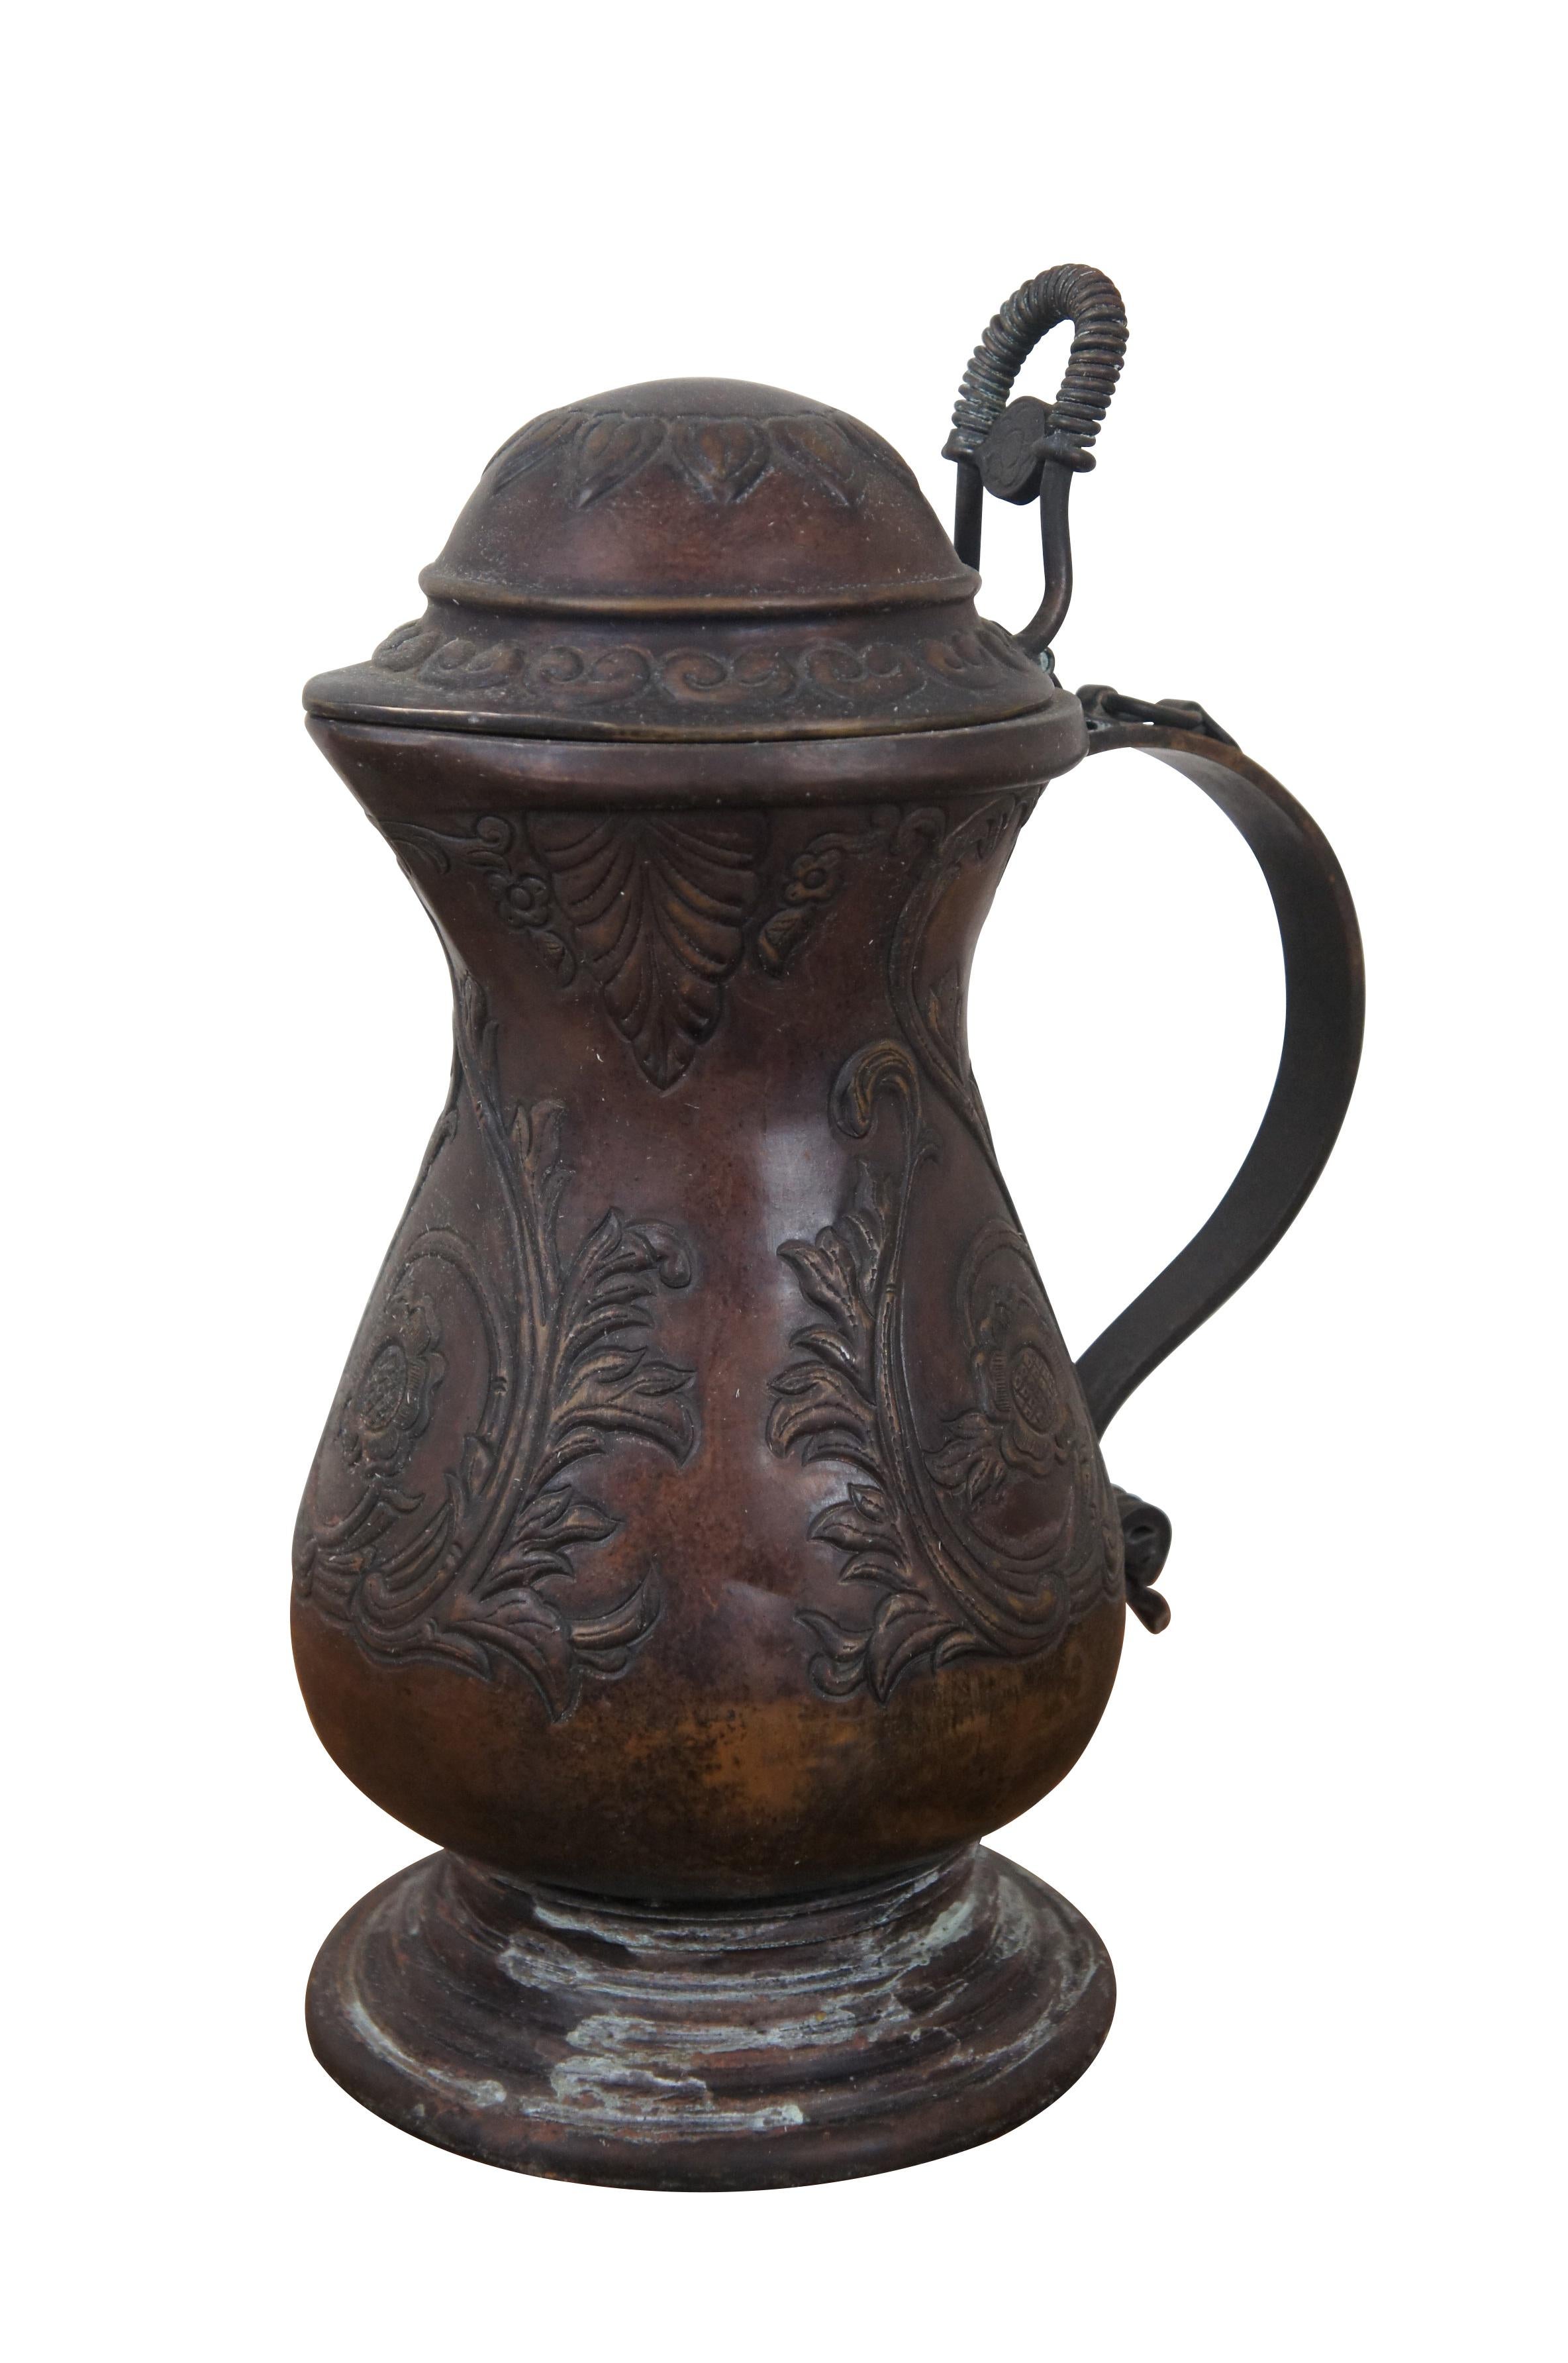 Rare Maitland Smith brass flip top jug / pitcher / flagon, with dark patina, scrolled handle and embossed with a design of swirling leaves, roses, and sunflower on the lid. 

Dimensions:
8.5